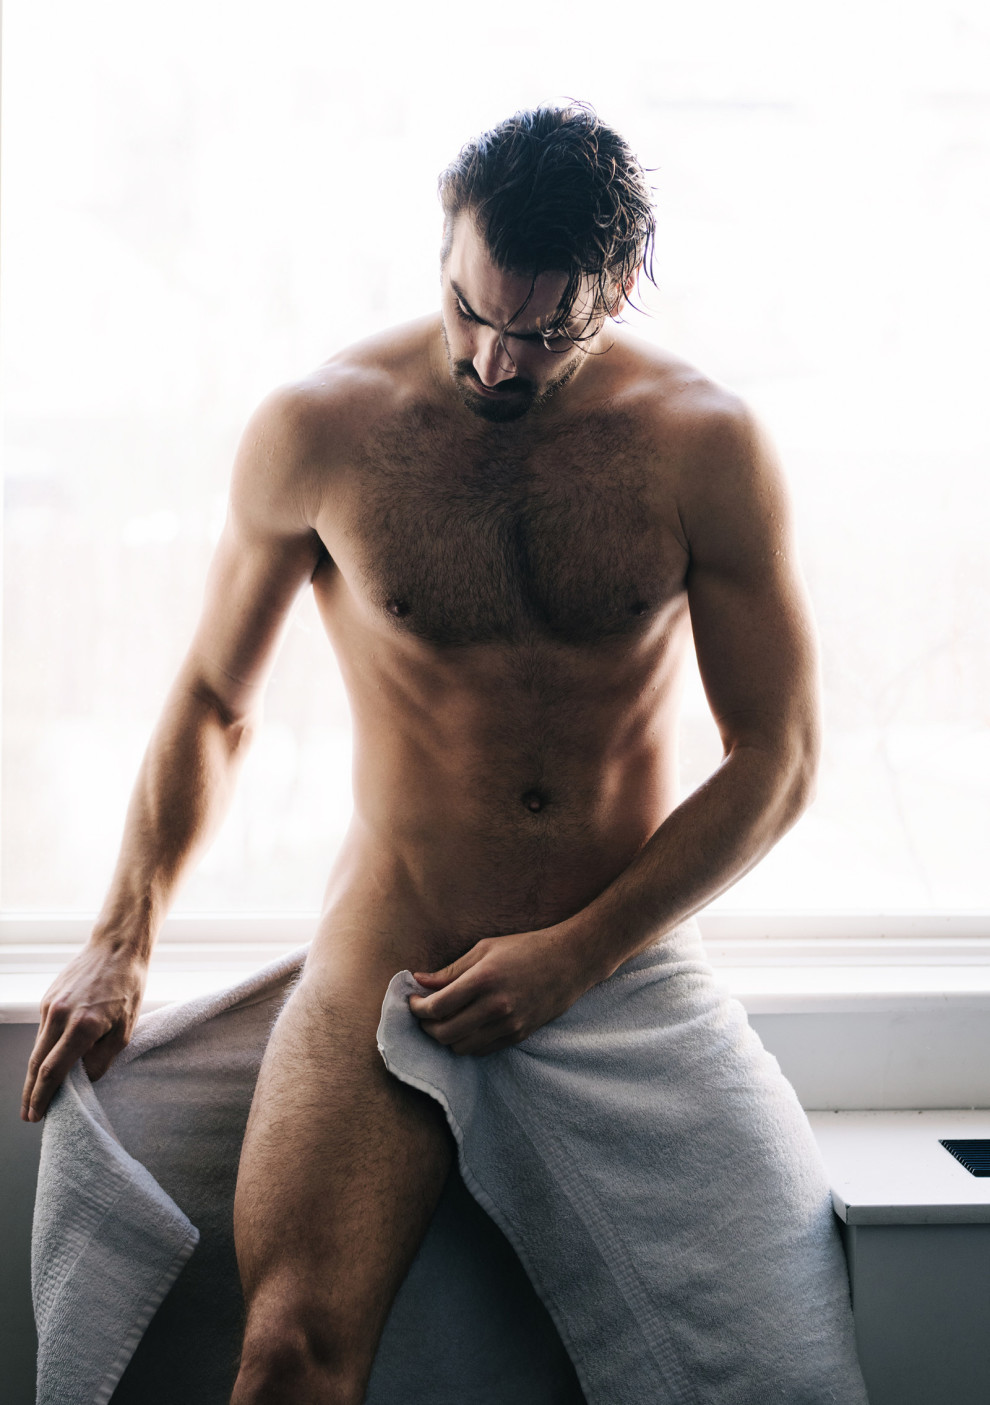 Photography: ANTM Winner Nyle DiMarco Bares Butt